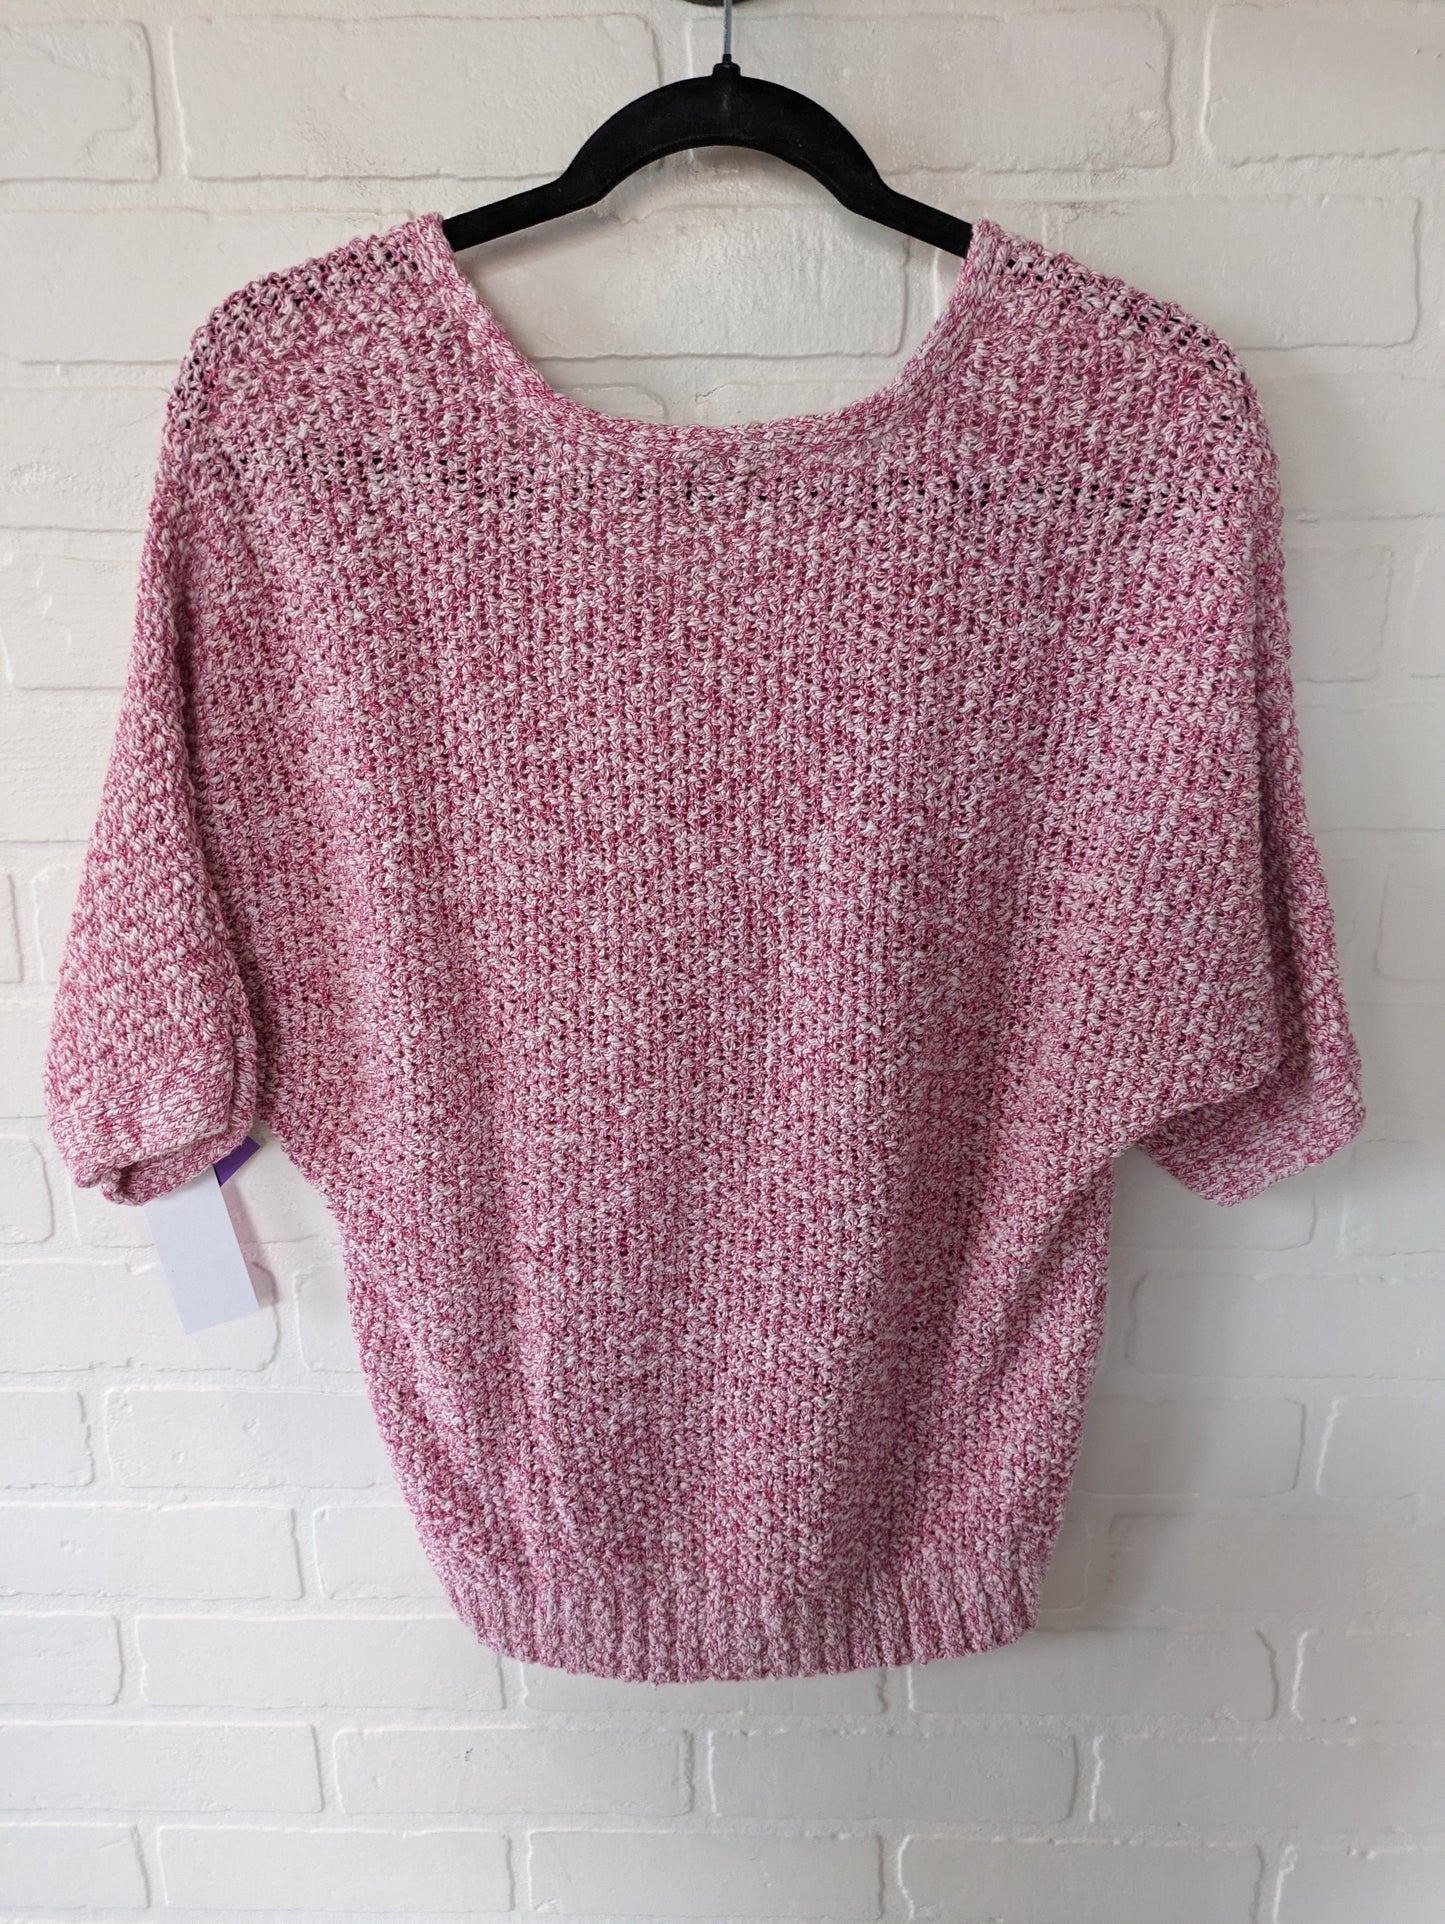 Pink & White Sweater Short Sleeve Chicos, Size S